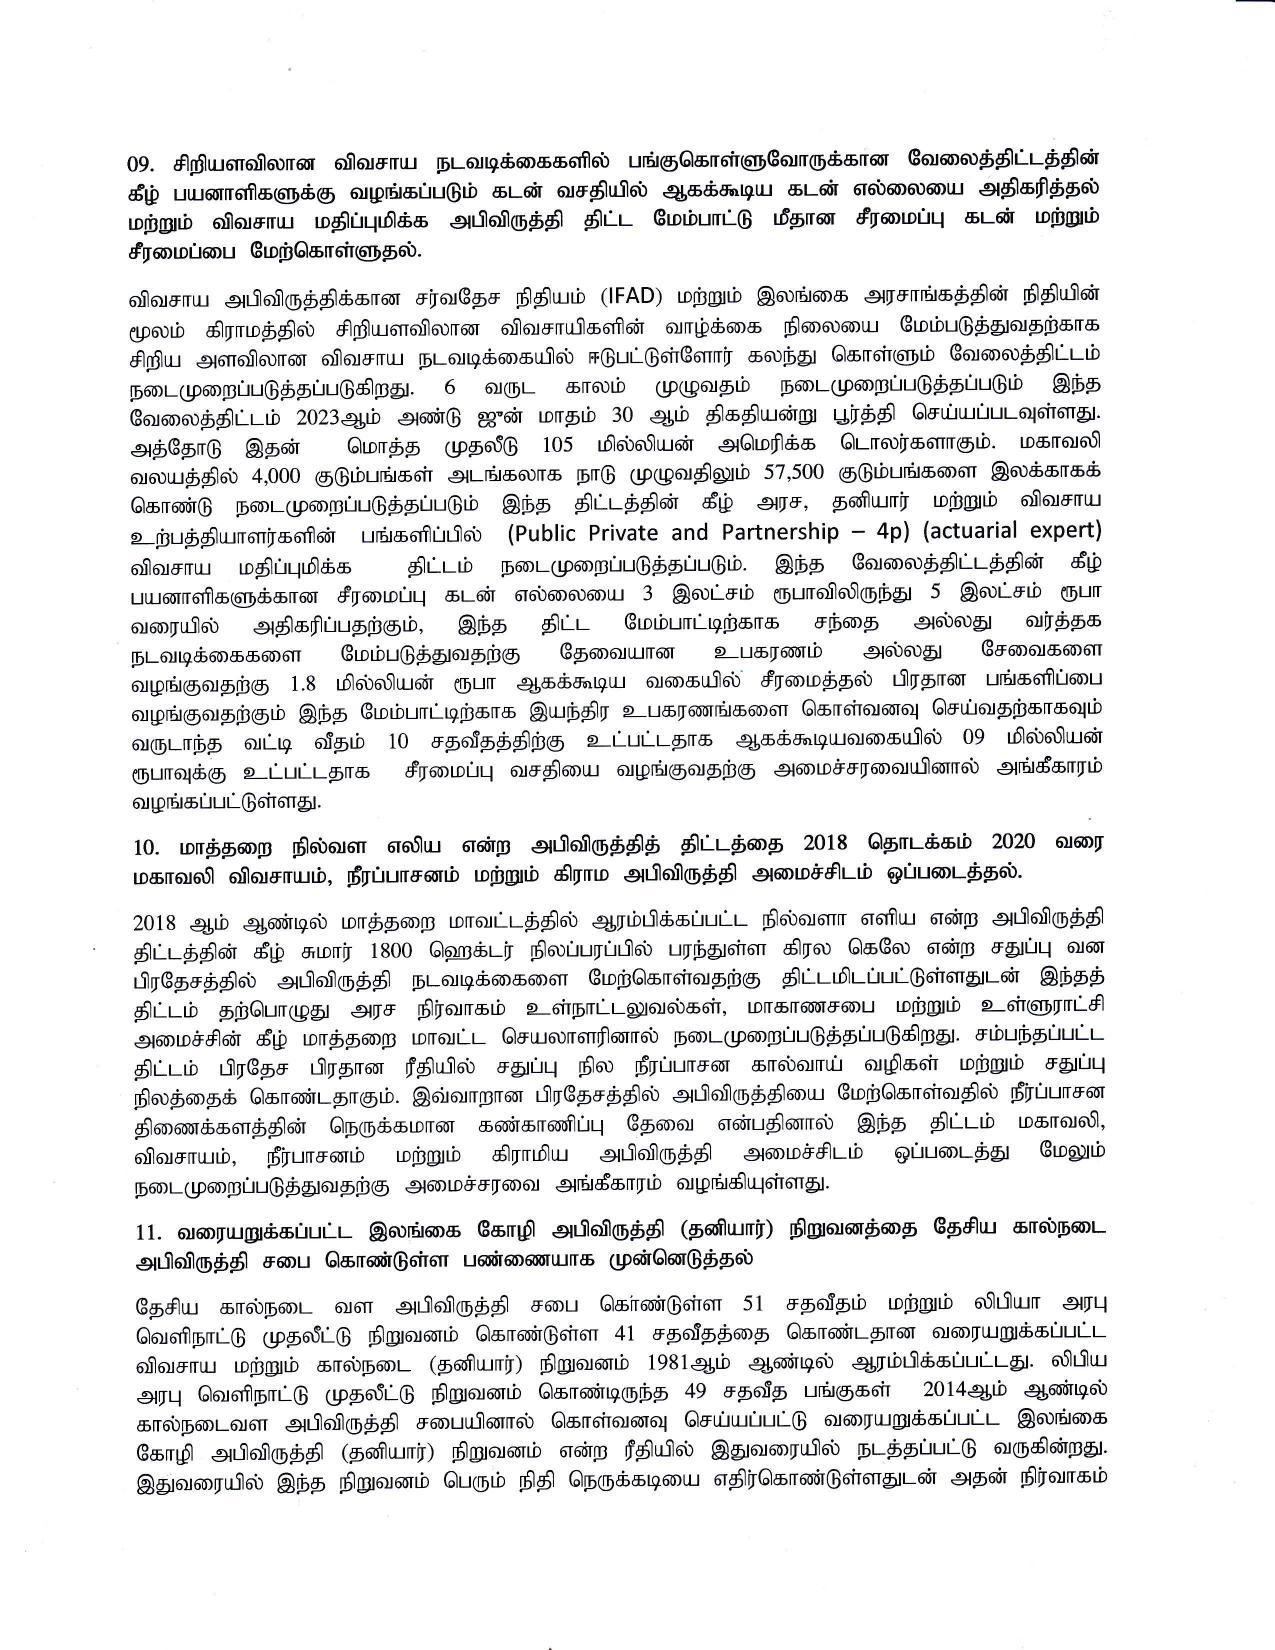 Tamil Cabinet 11.06.20 min page 004